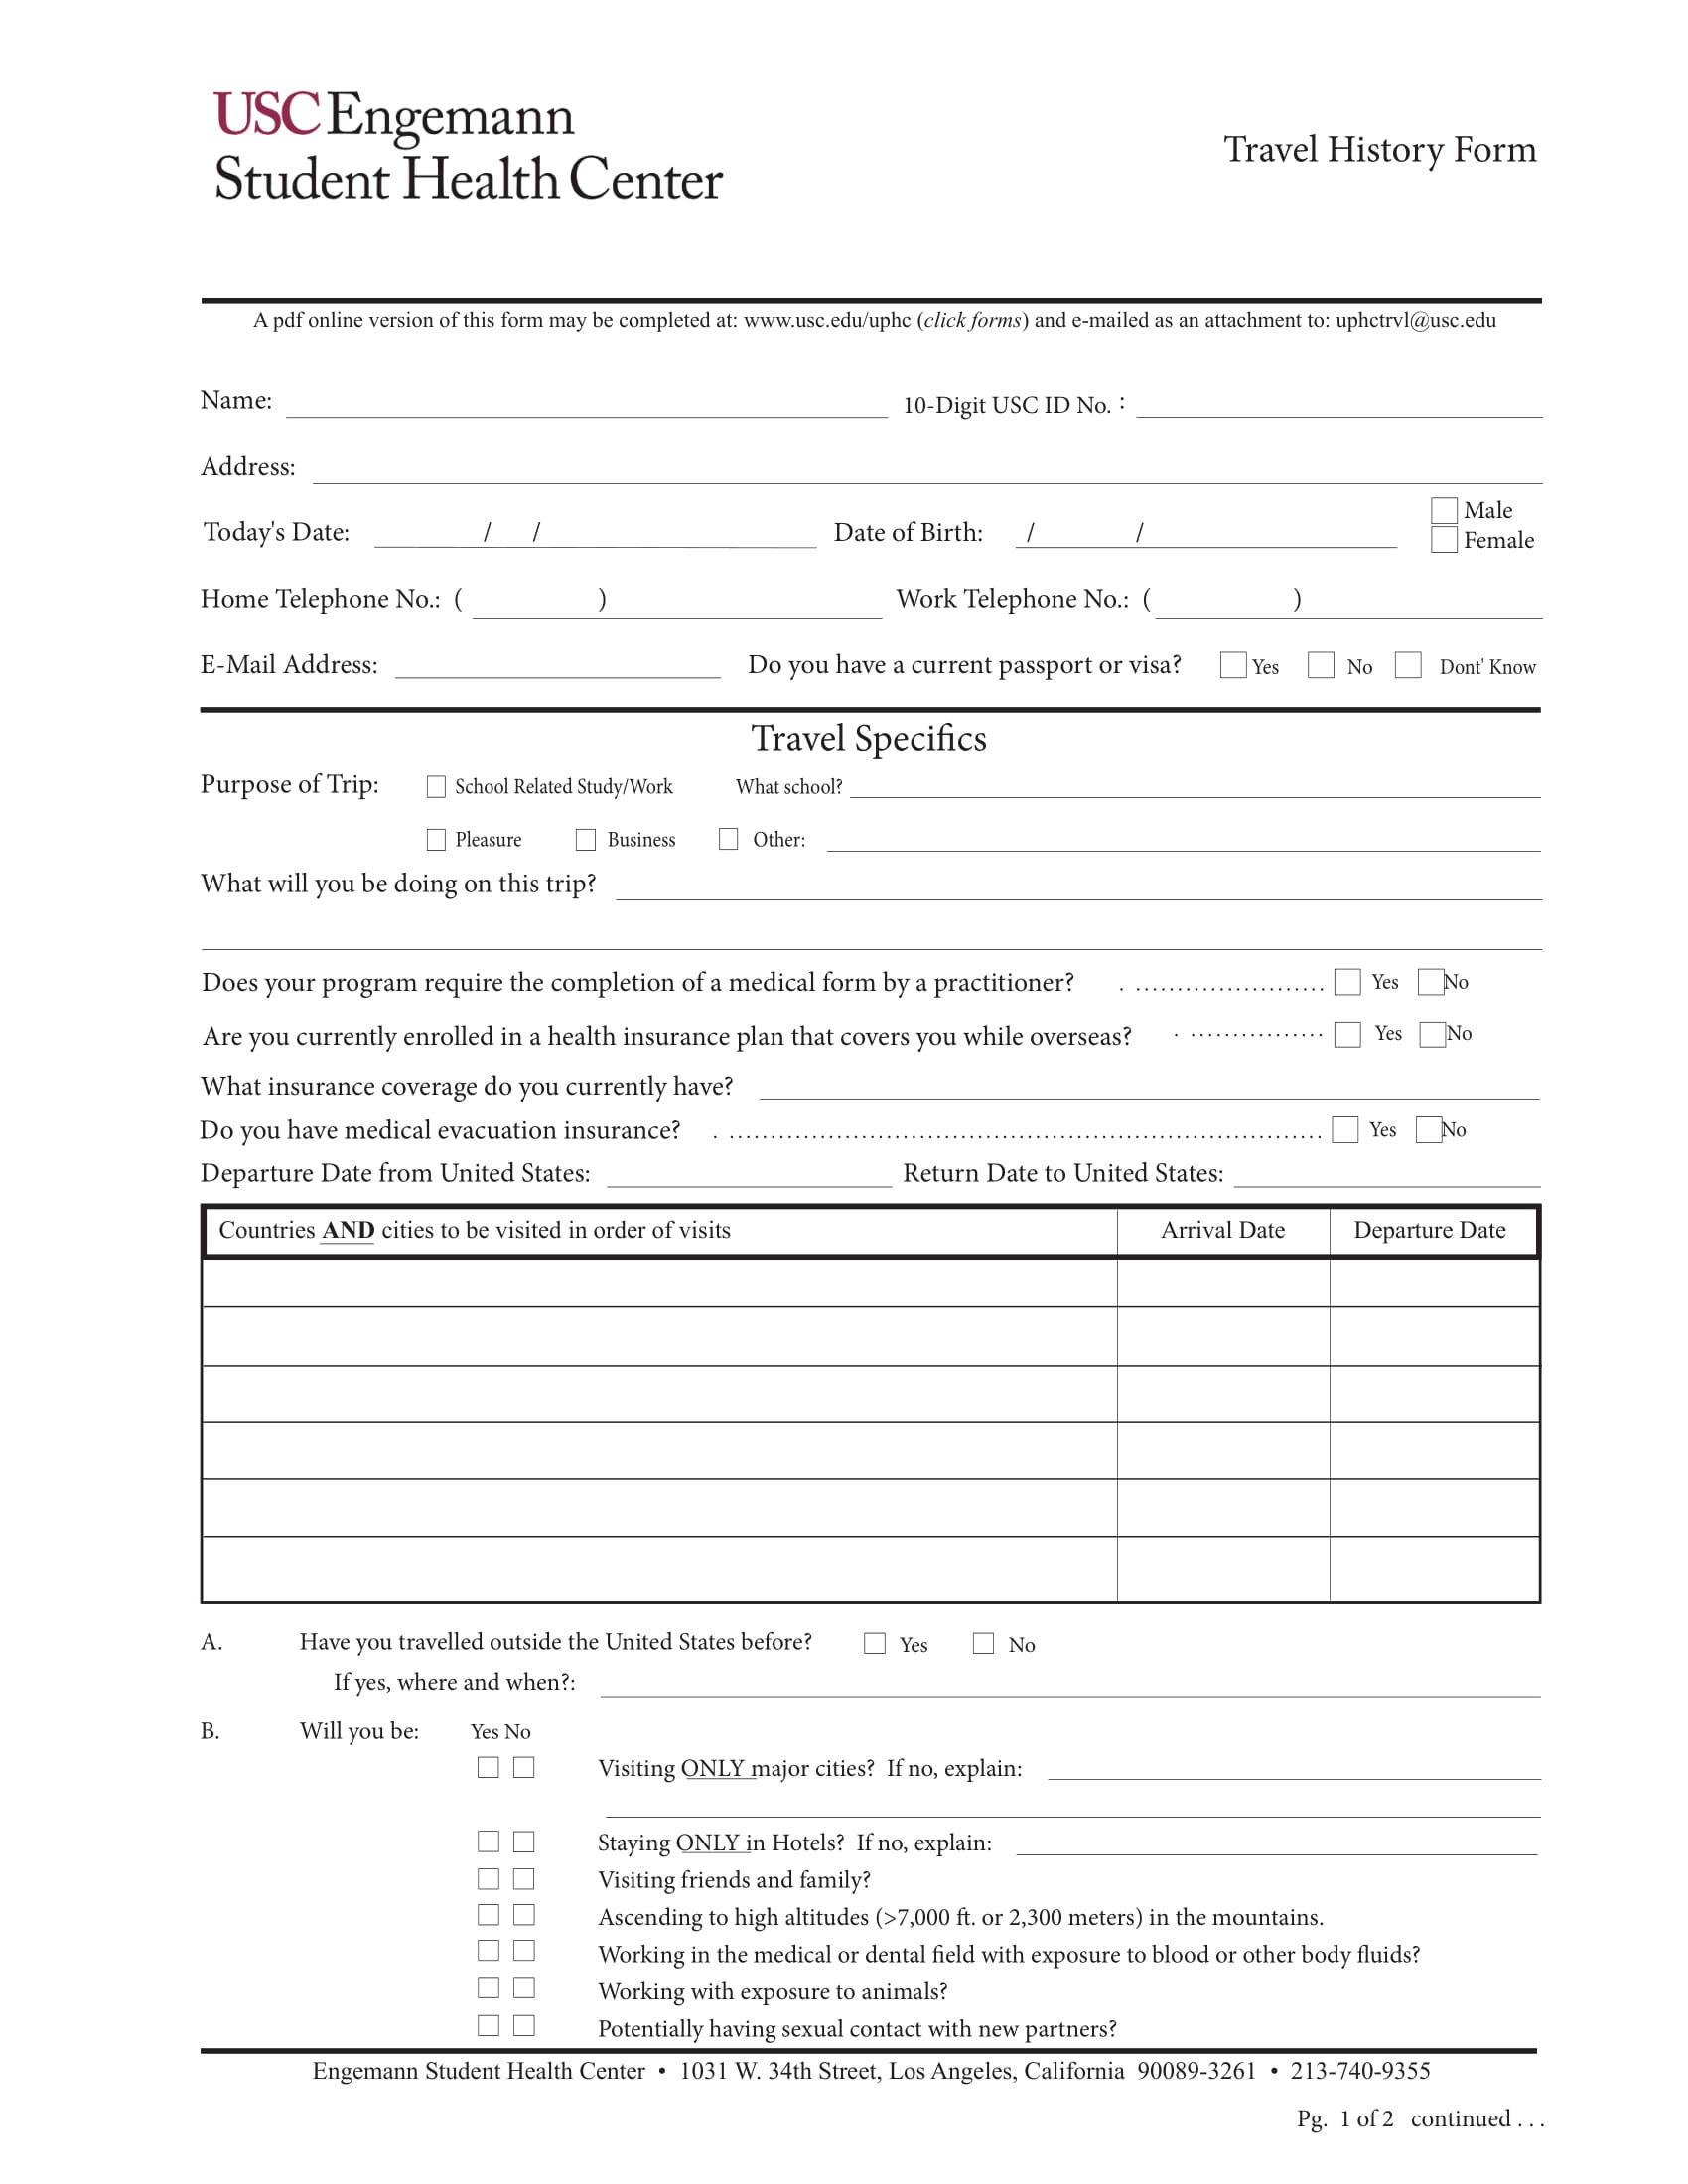 trip or travel history form 1